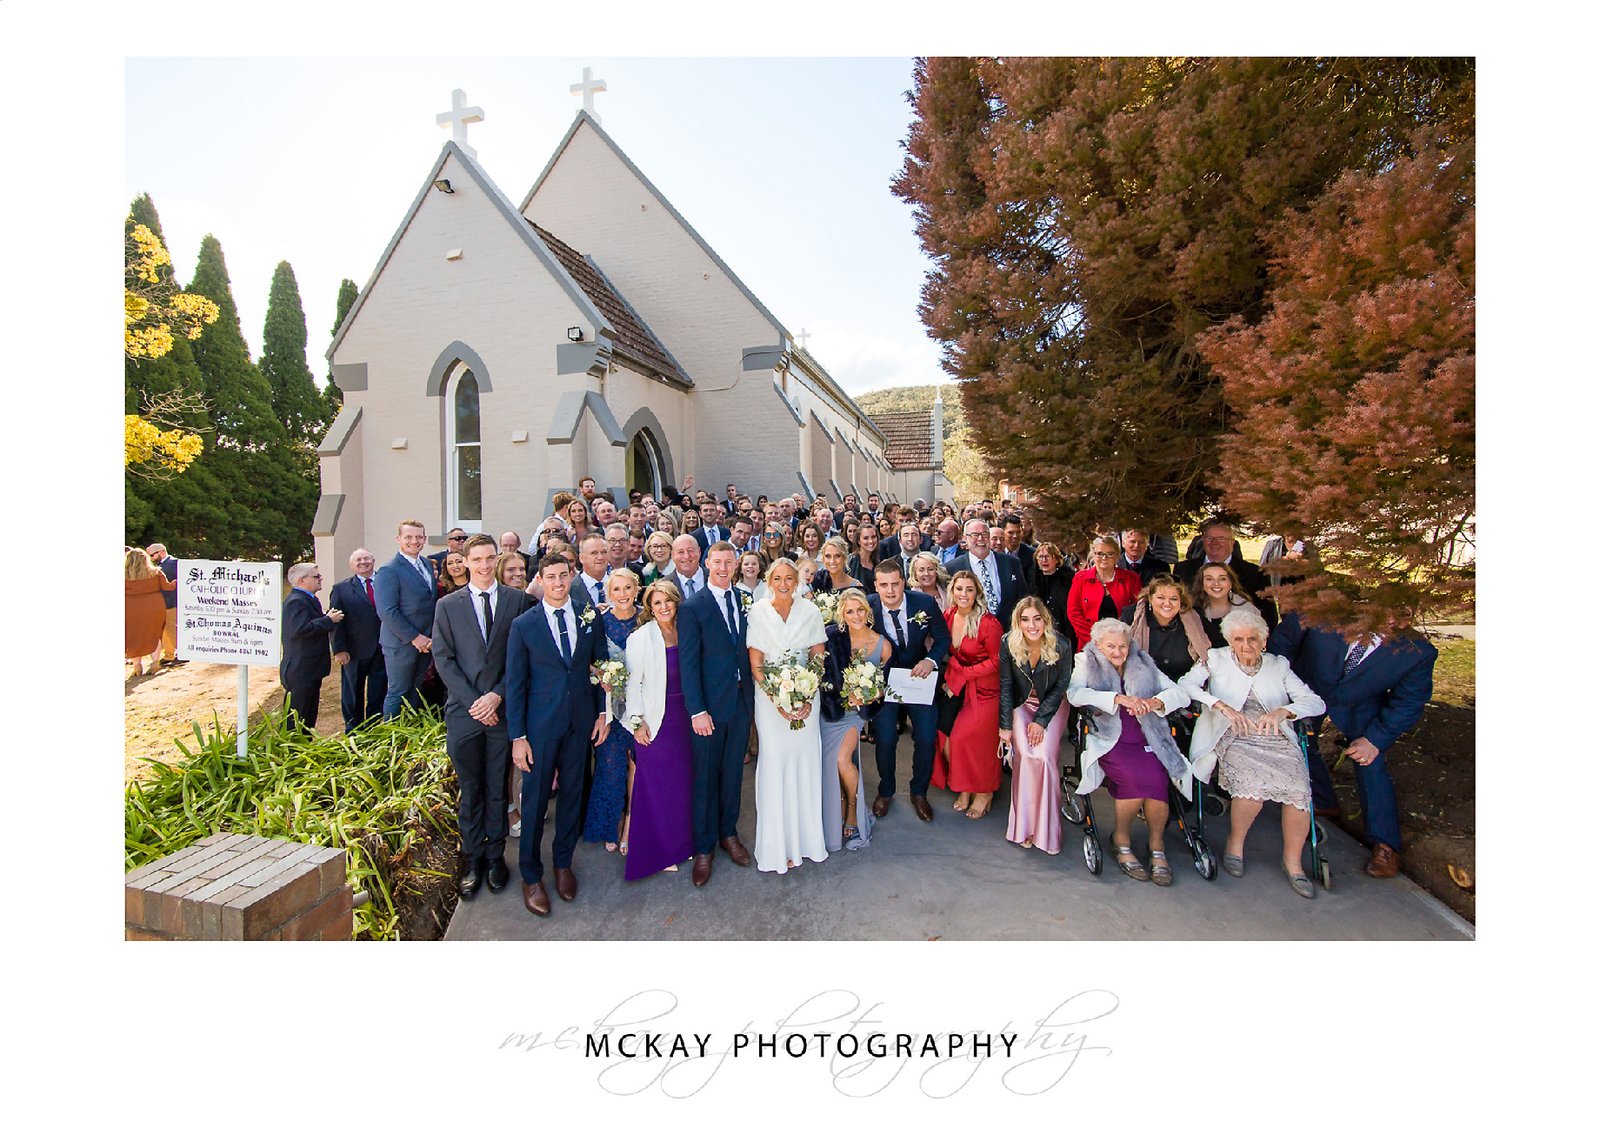 Group wedding photo outside St Michael's Church in Mittagong